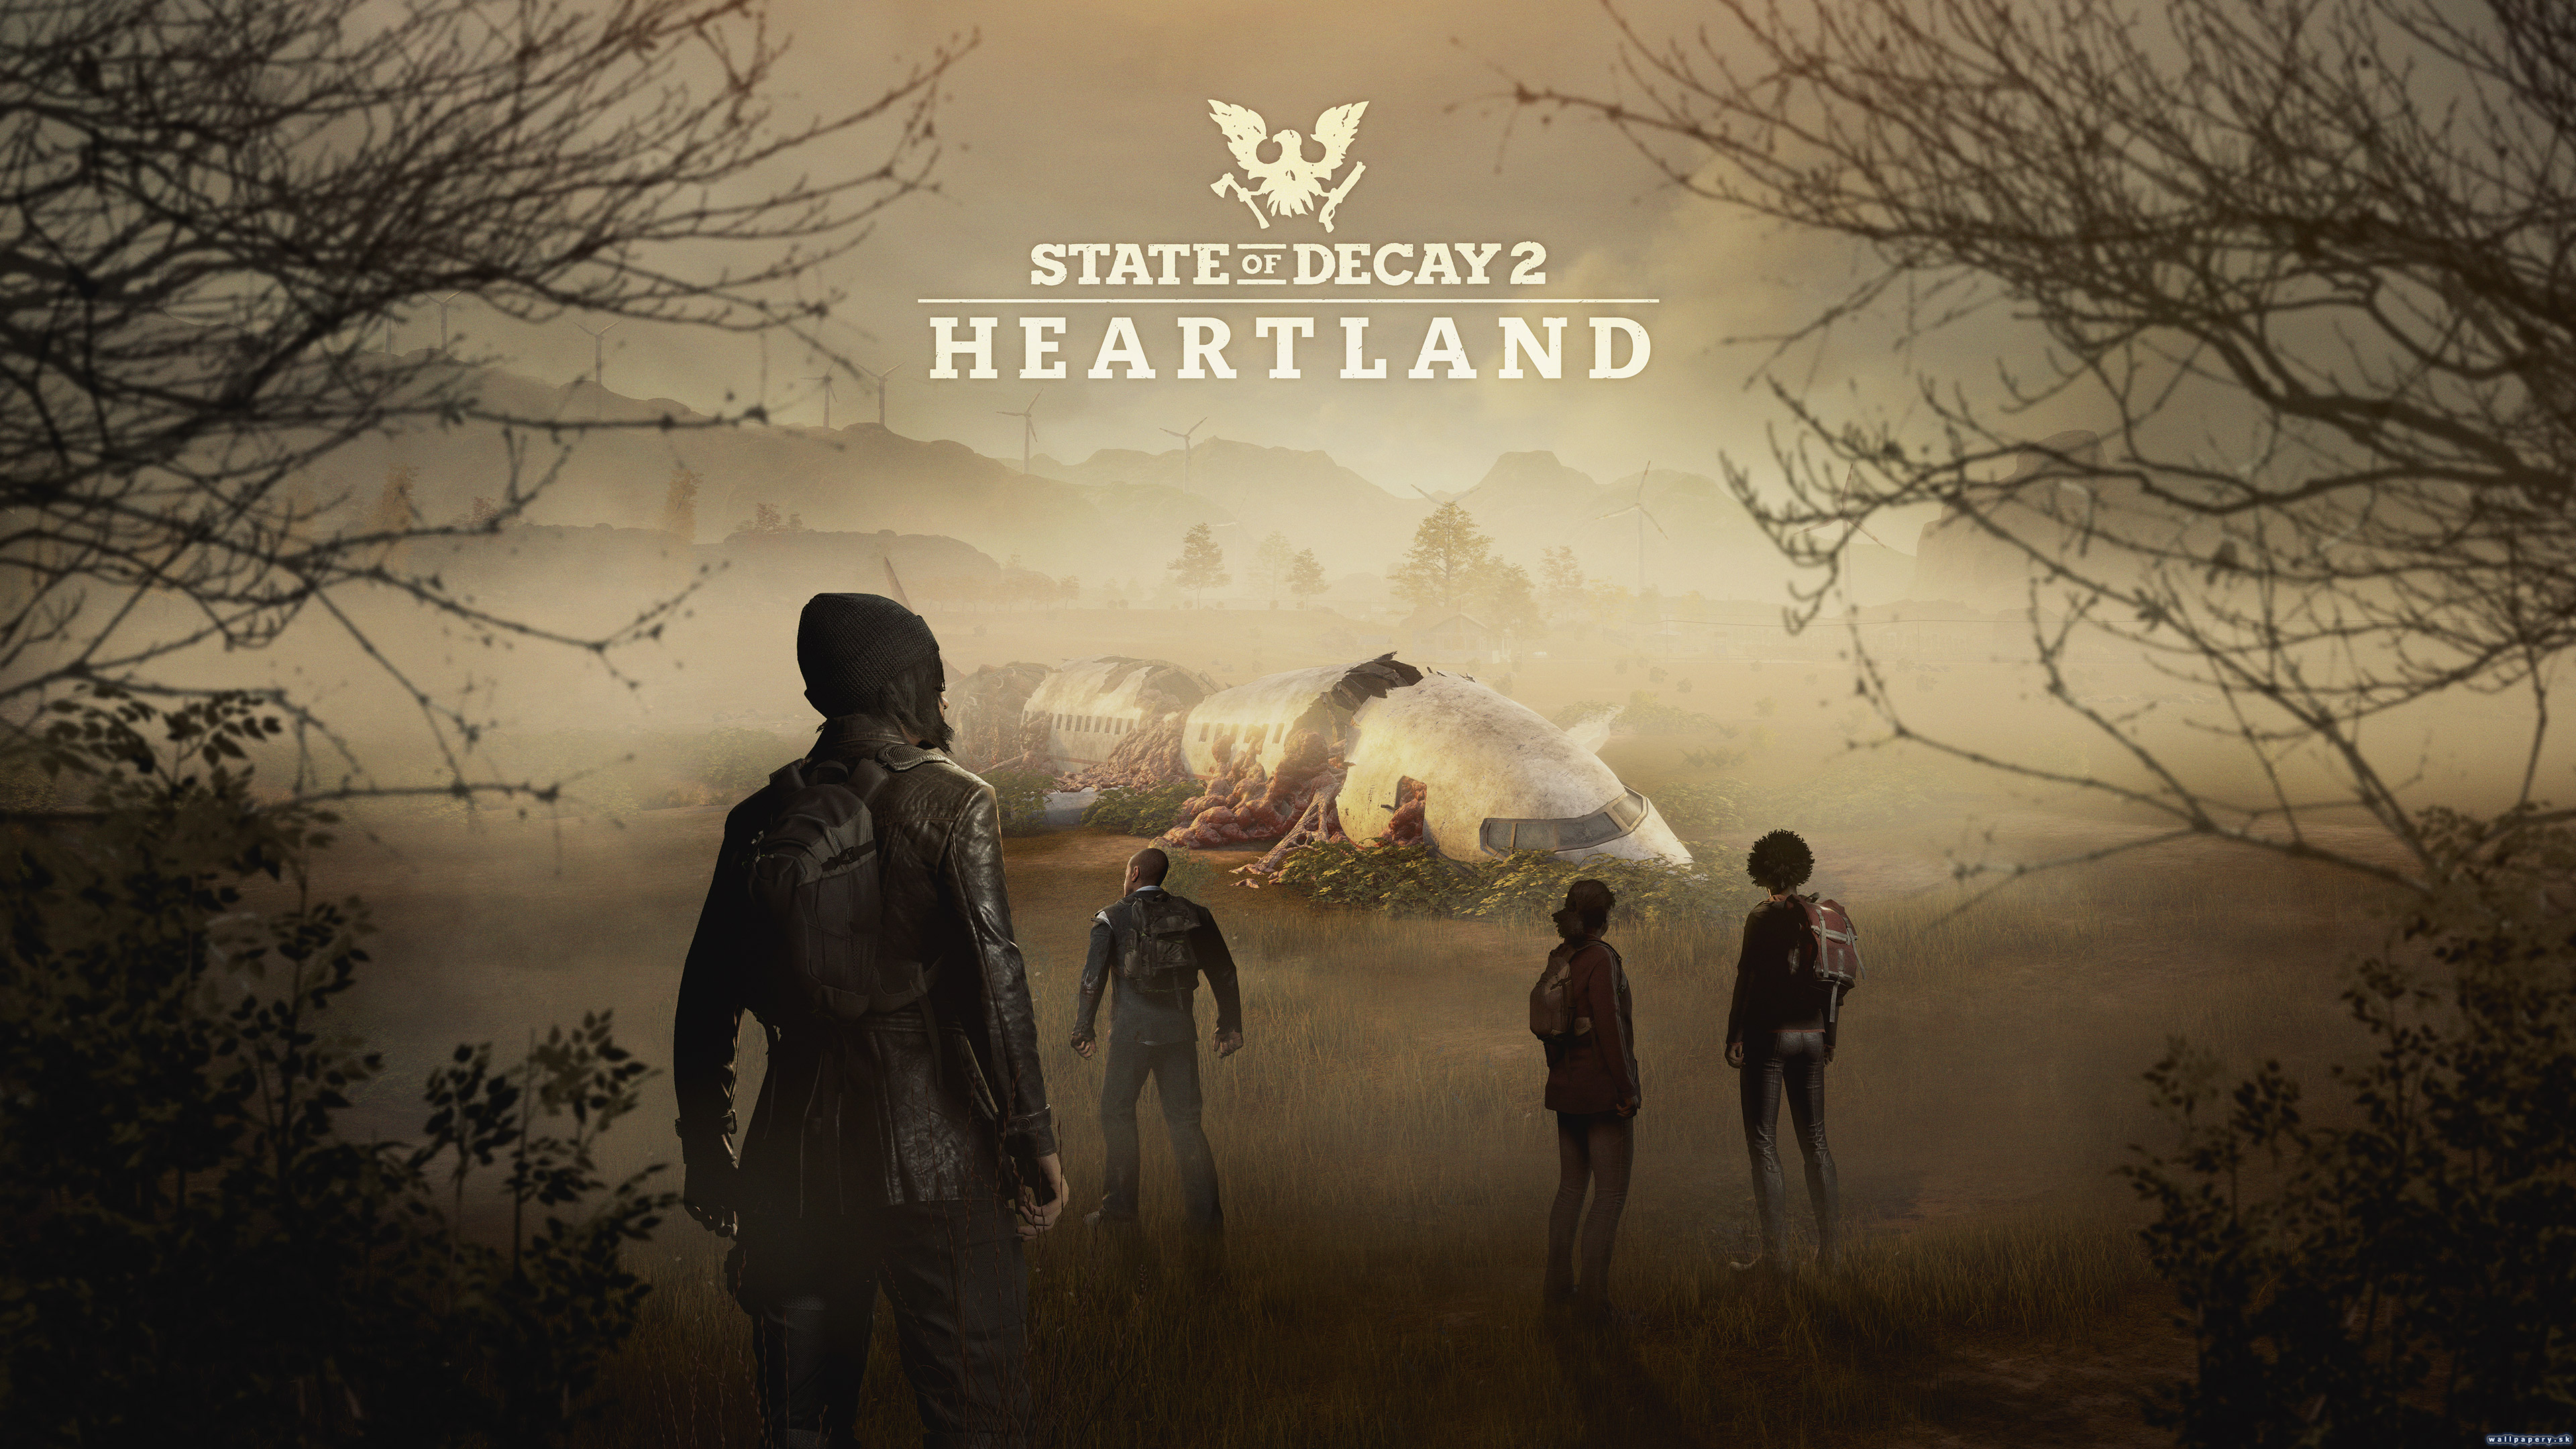 State of Decay 2: Heartland - wallpaper 1